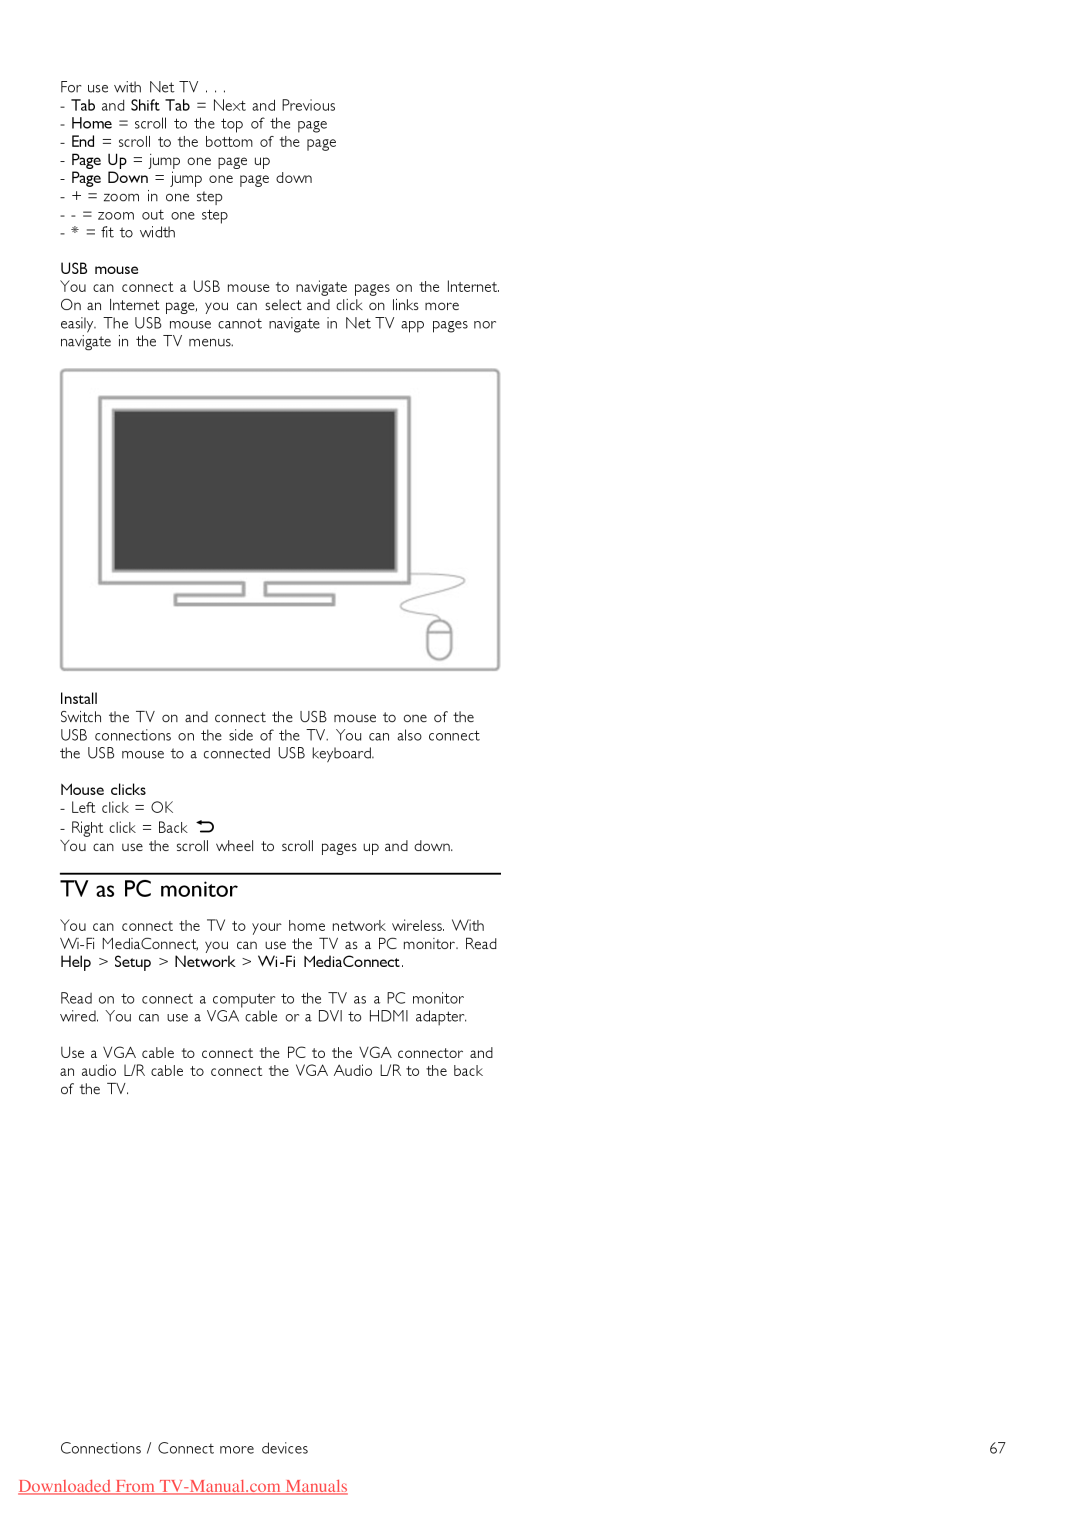 Philips 46PFL9706 manual TV as PC monitor, Downloaded From TV-Manual.com Manuals 